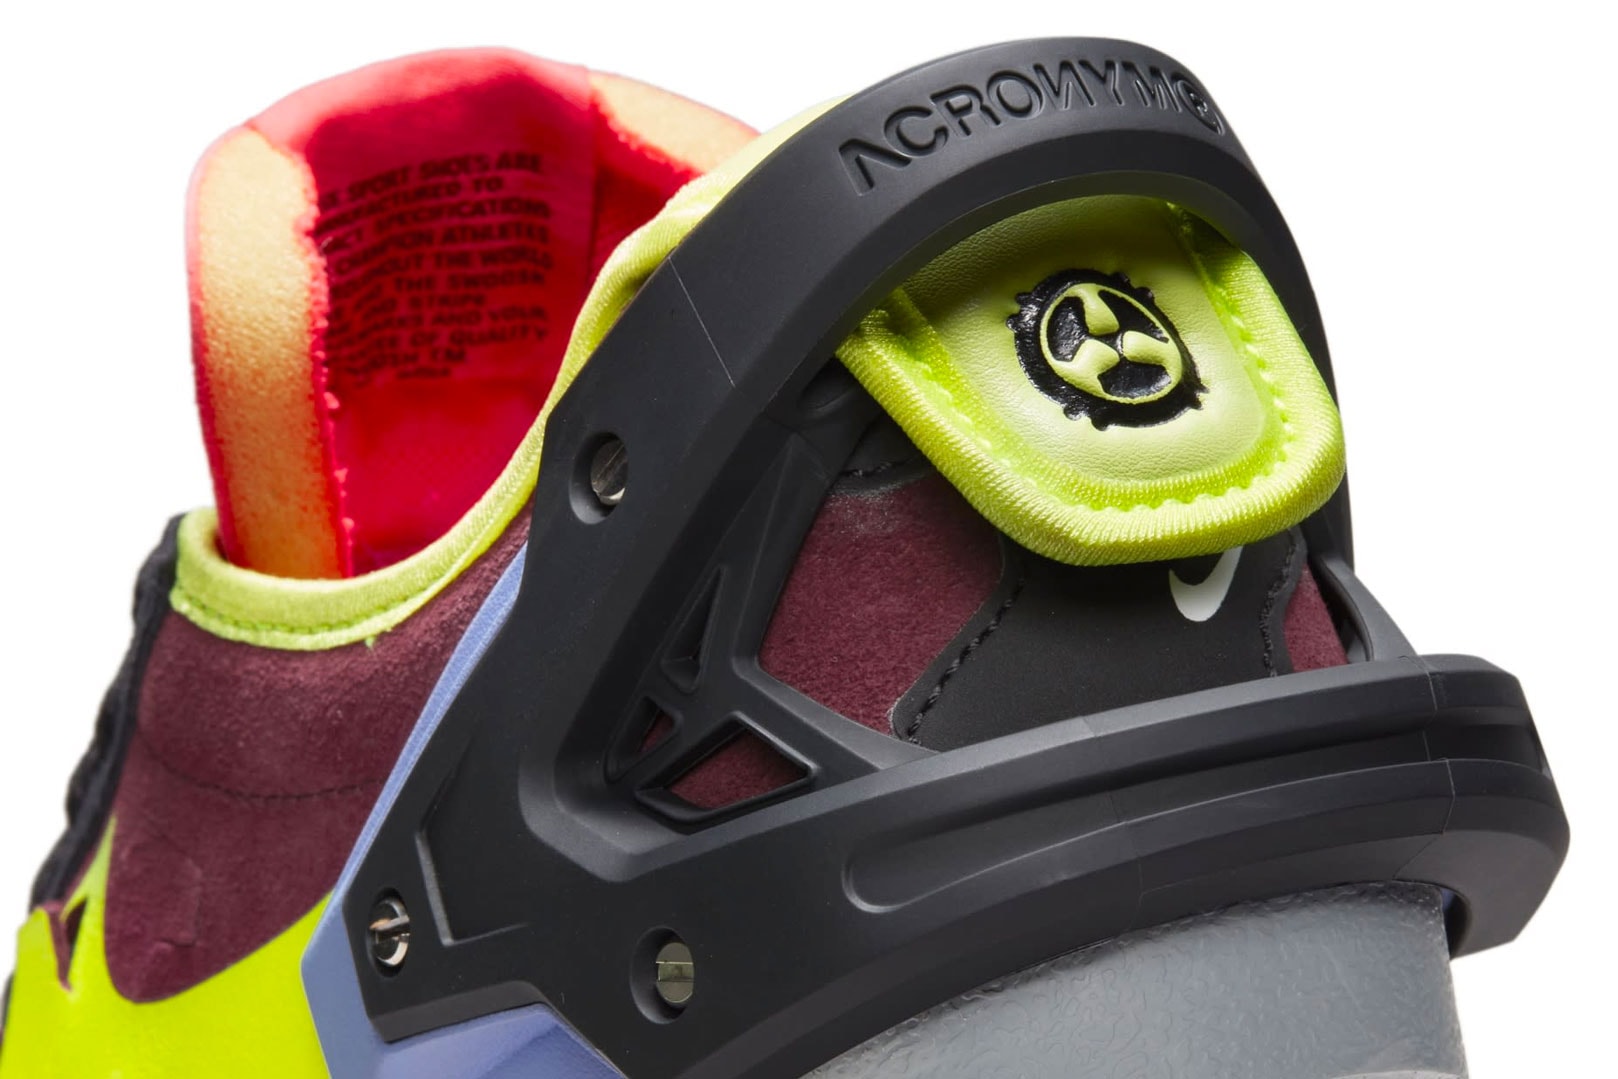 Official Look at the ACRONYM x Nike Blazer Low night maroon neon yellow lilac black glow in the dark green cutout foam calligraphy shuriken sneaker release date info price